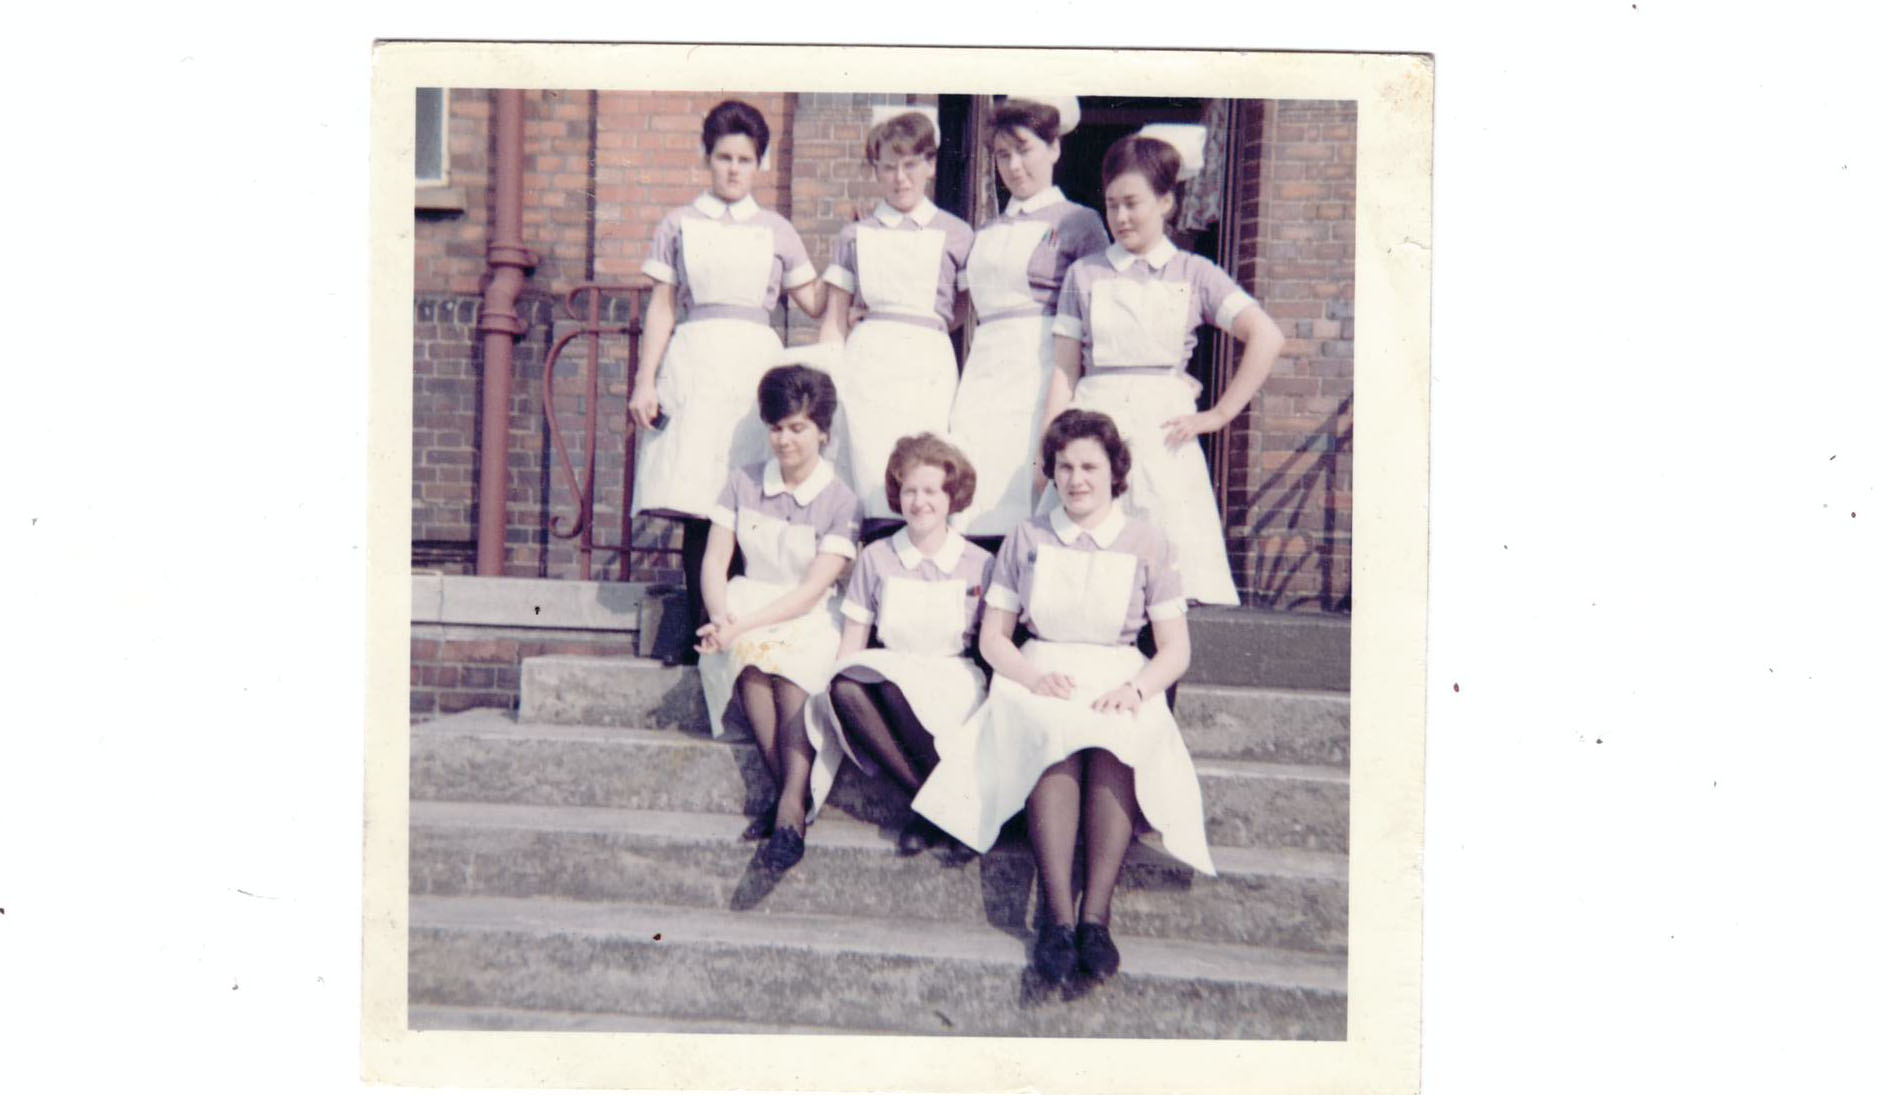 old fashioned image of a group of nurses